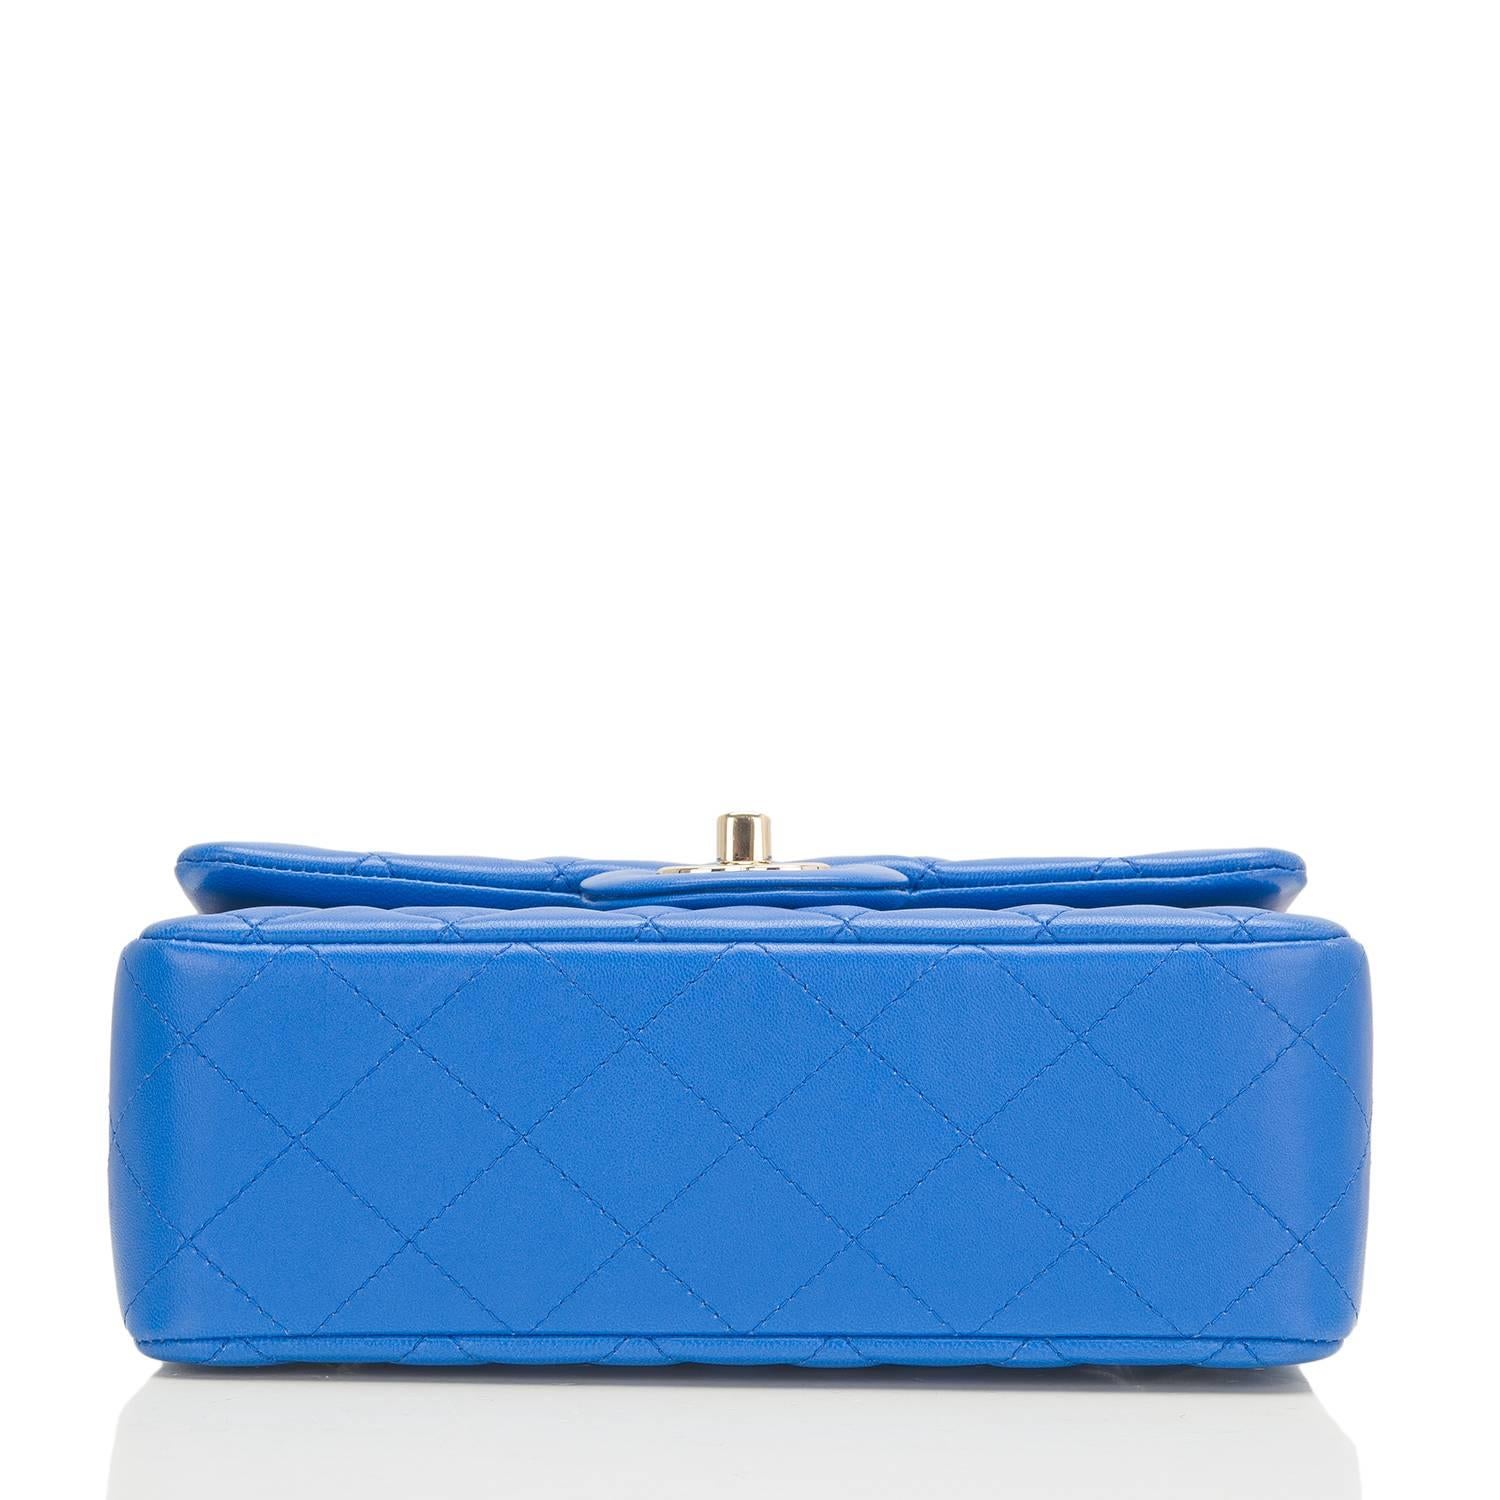 Chanel Blue Quilted Lambskin Rectangular Mini Classic Flap Bag For Sale 1